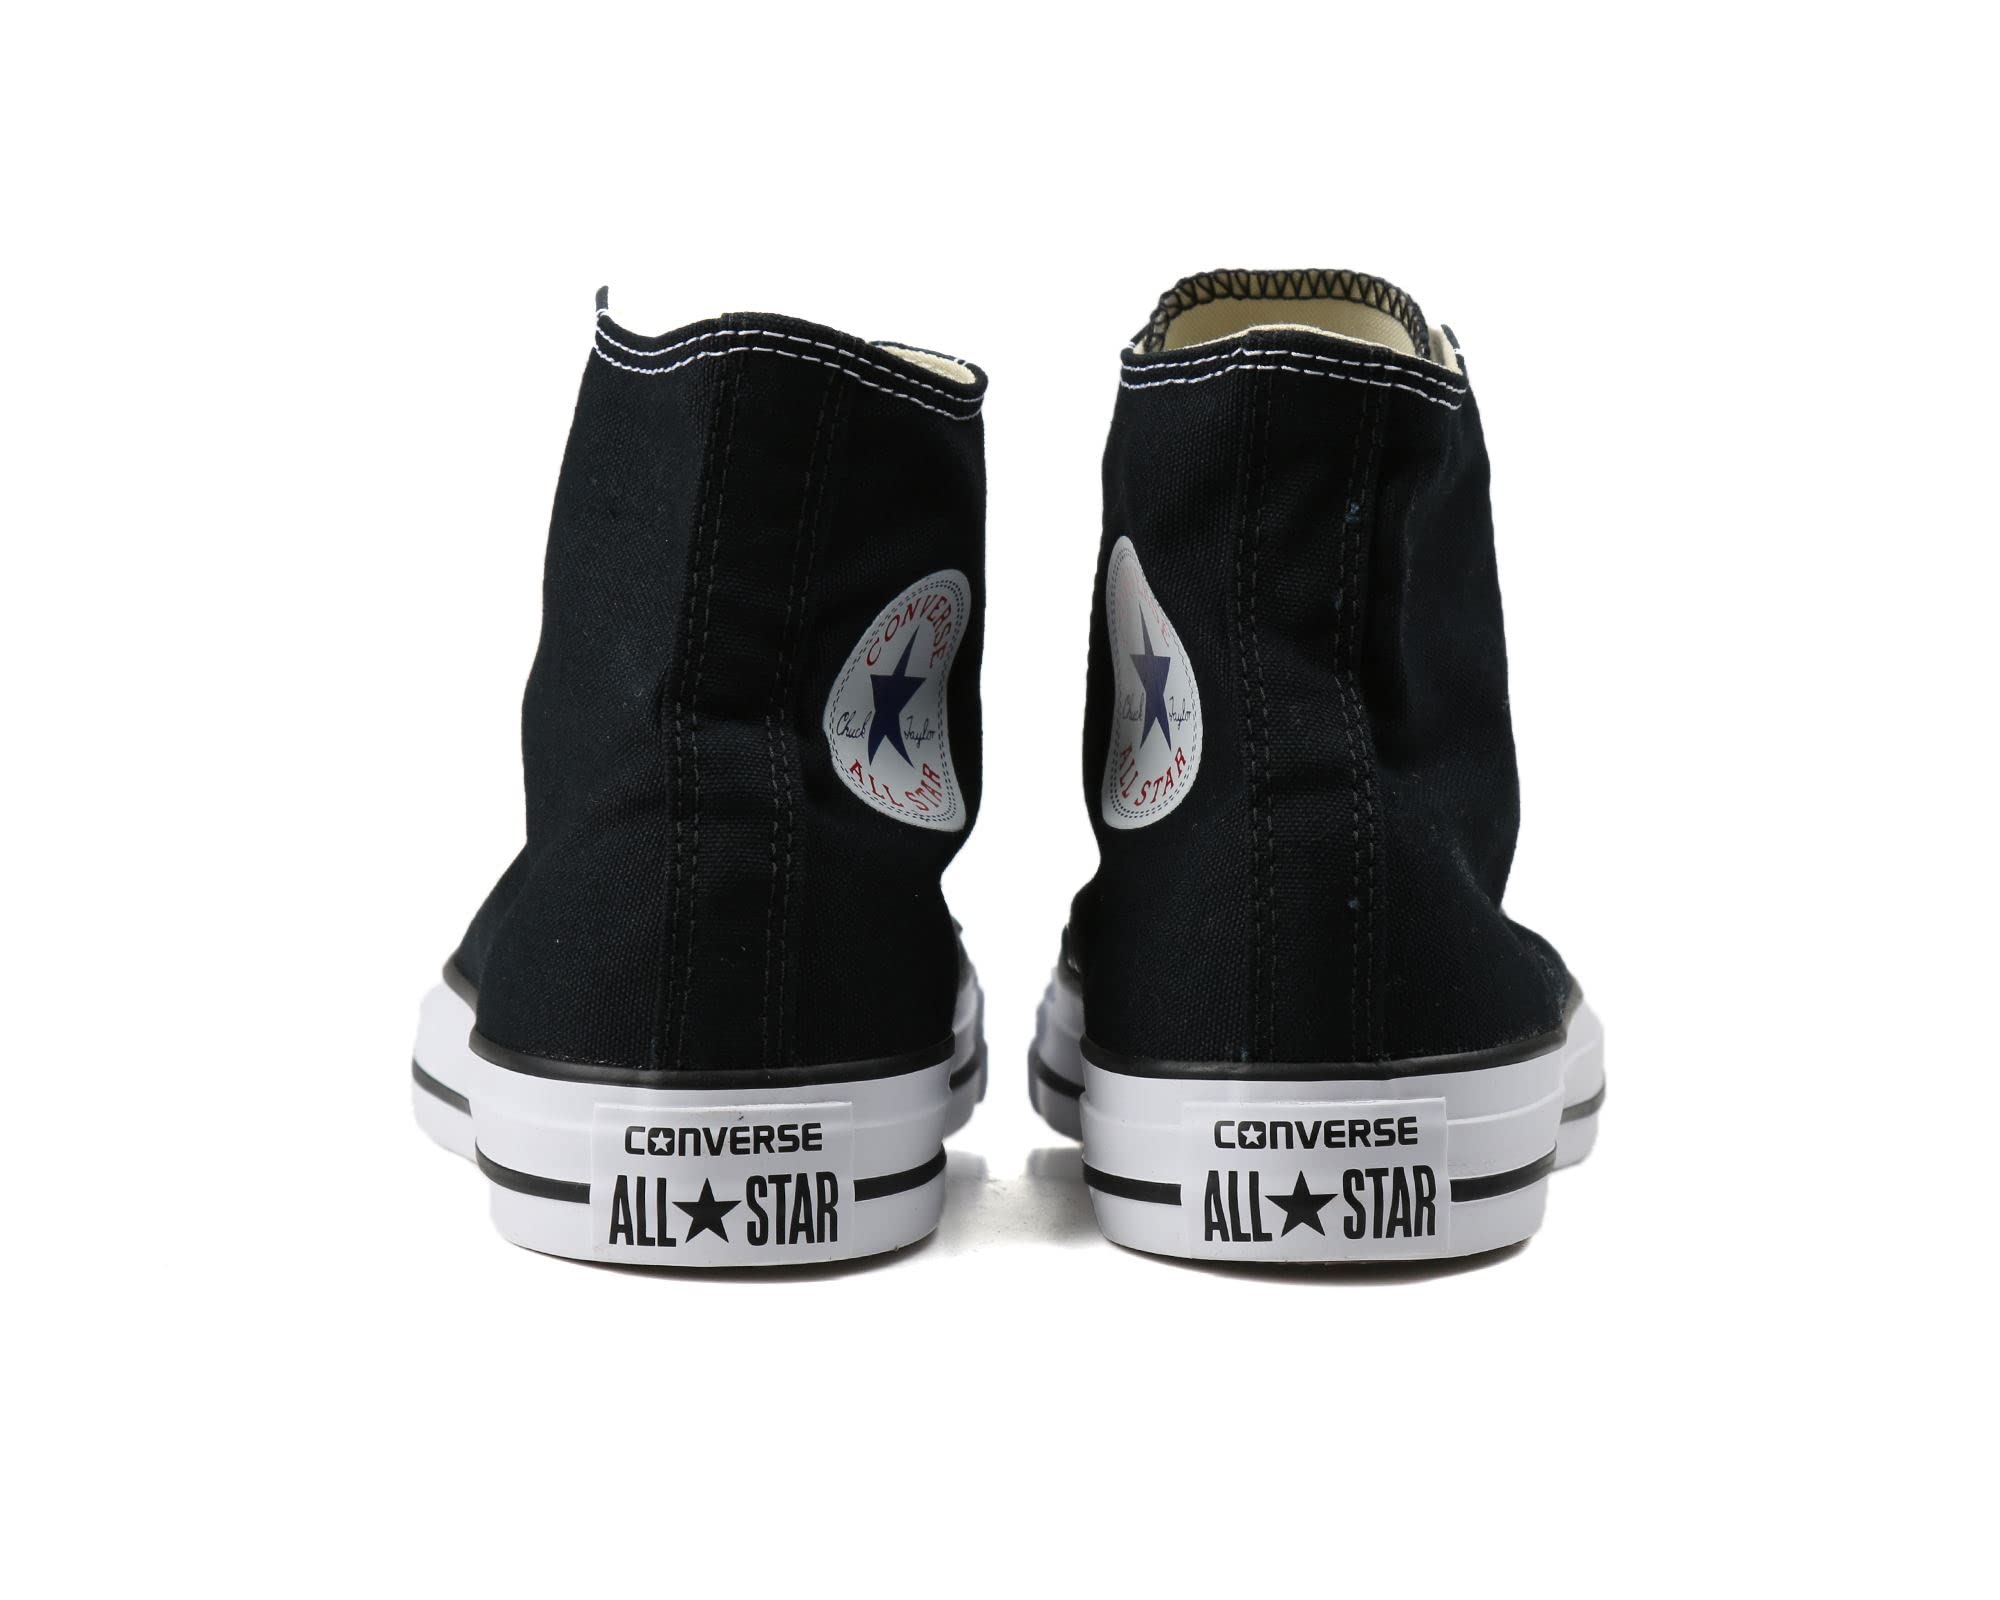 Converse Women's Chuck Taylor All Star Sneakers